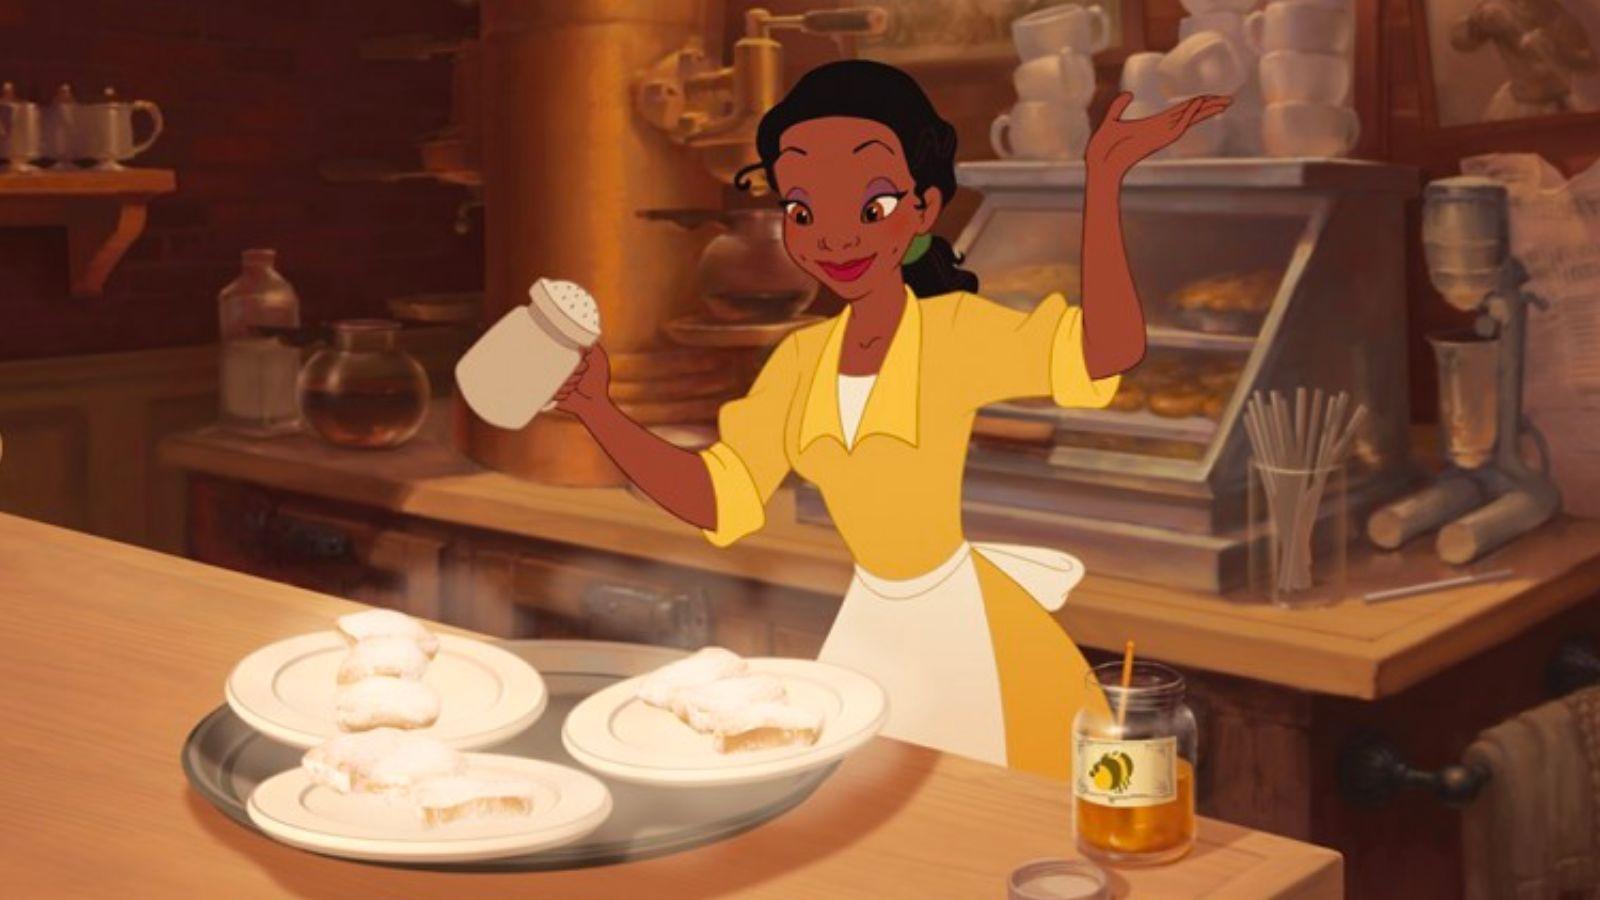 Tiana cooking in her restaurant in Princess and the Frog